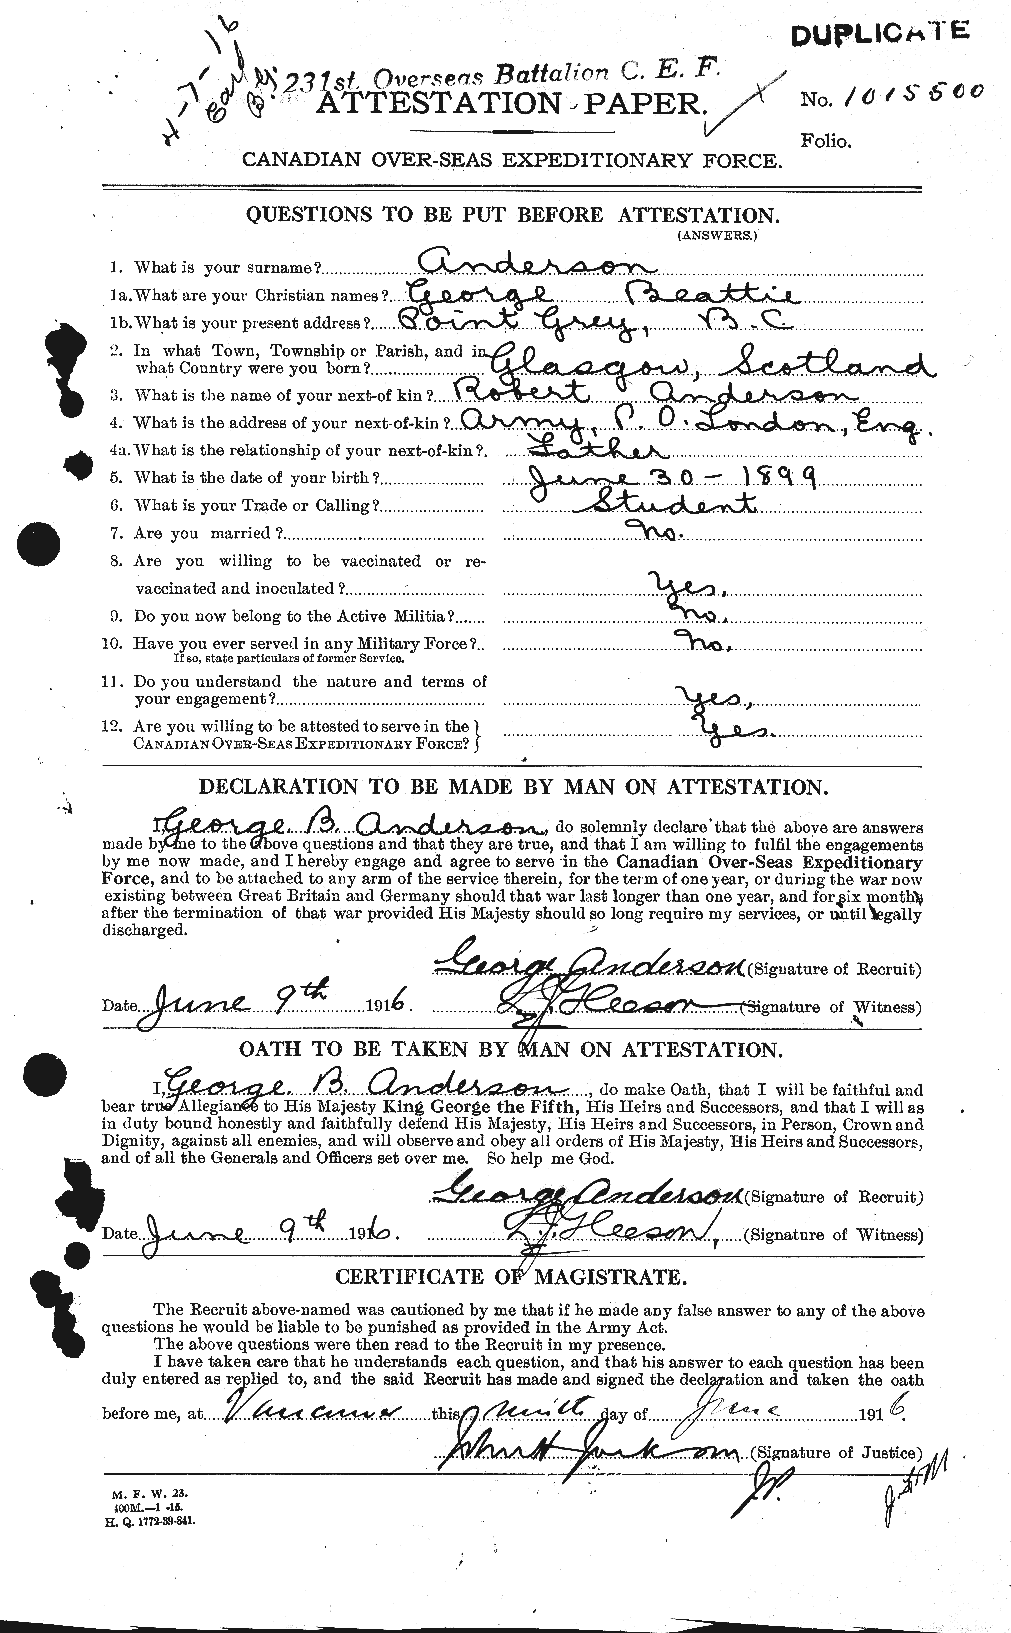 Personnel Records of the First World War - CEF 209737a